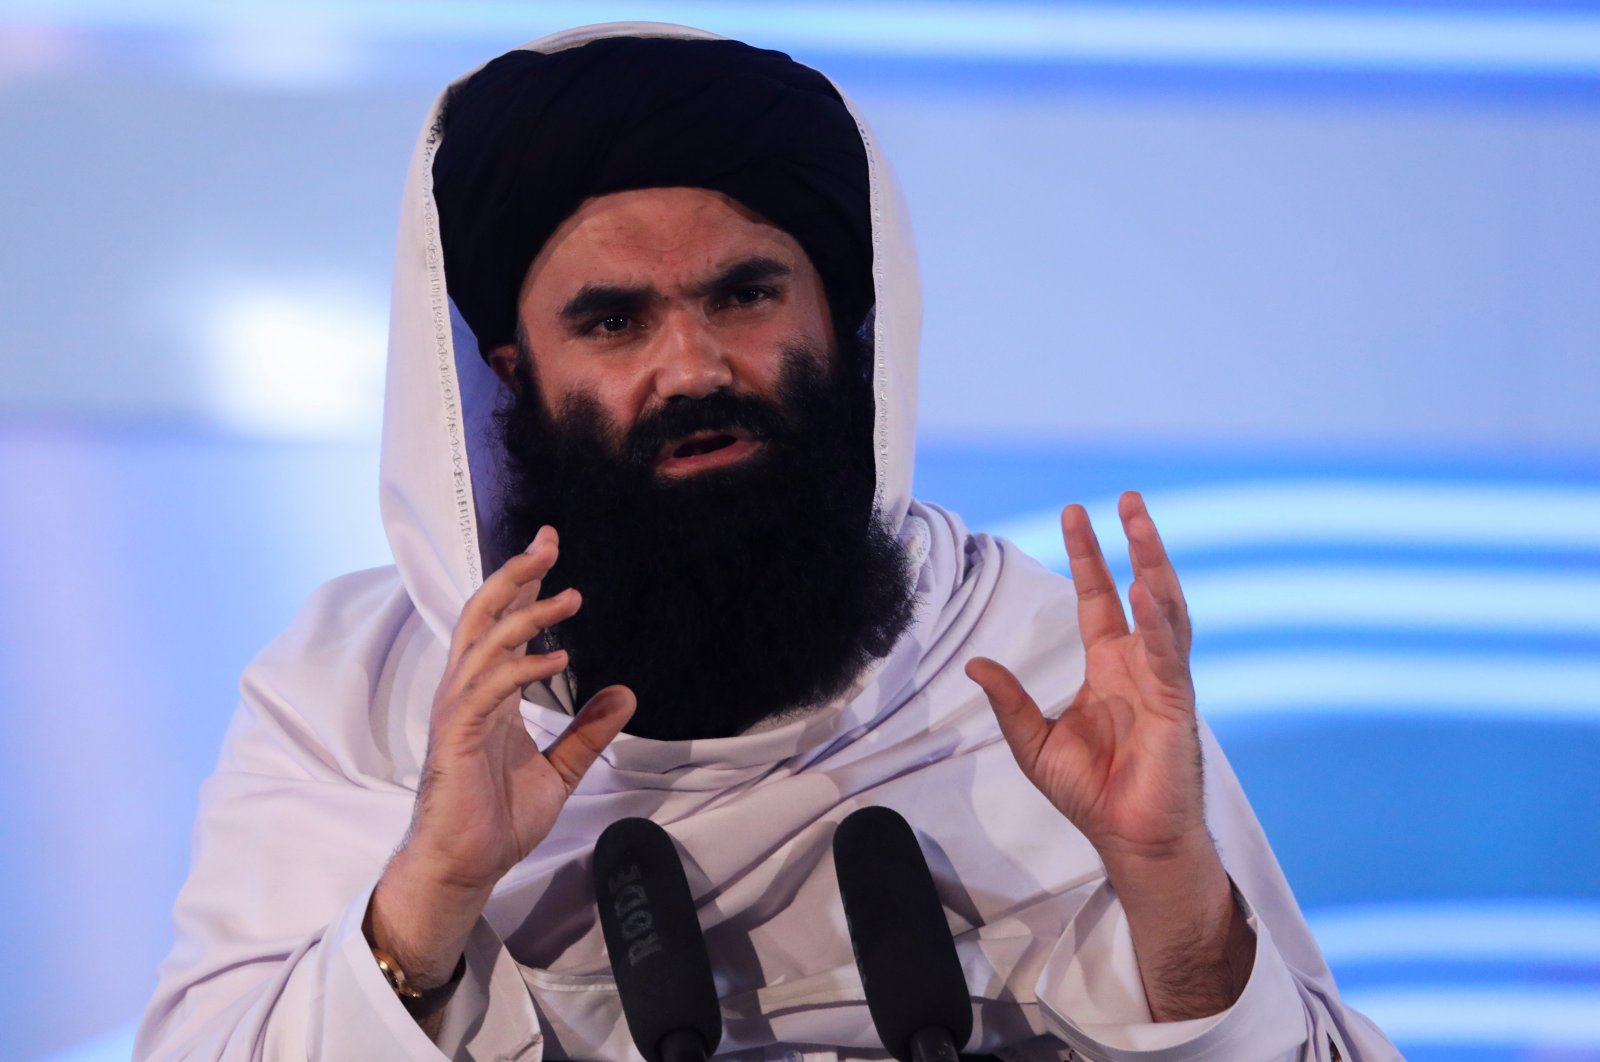 Afghan Taliban&#039;s acting Interior Minister Sirajuddin Haqqani speaks during the anniversary event of the departure of the Soviet Union from Afghanistan, in Kabul, Afghanistan, April 28, 2022. (Reuters File Photo)